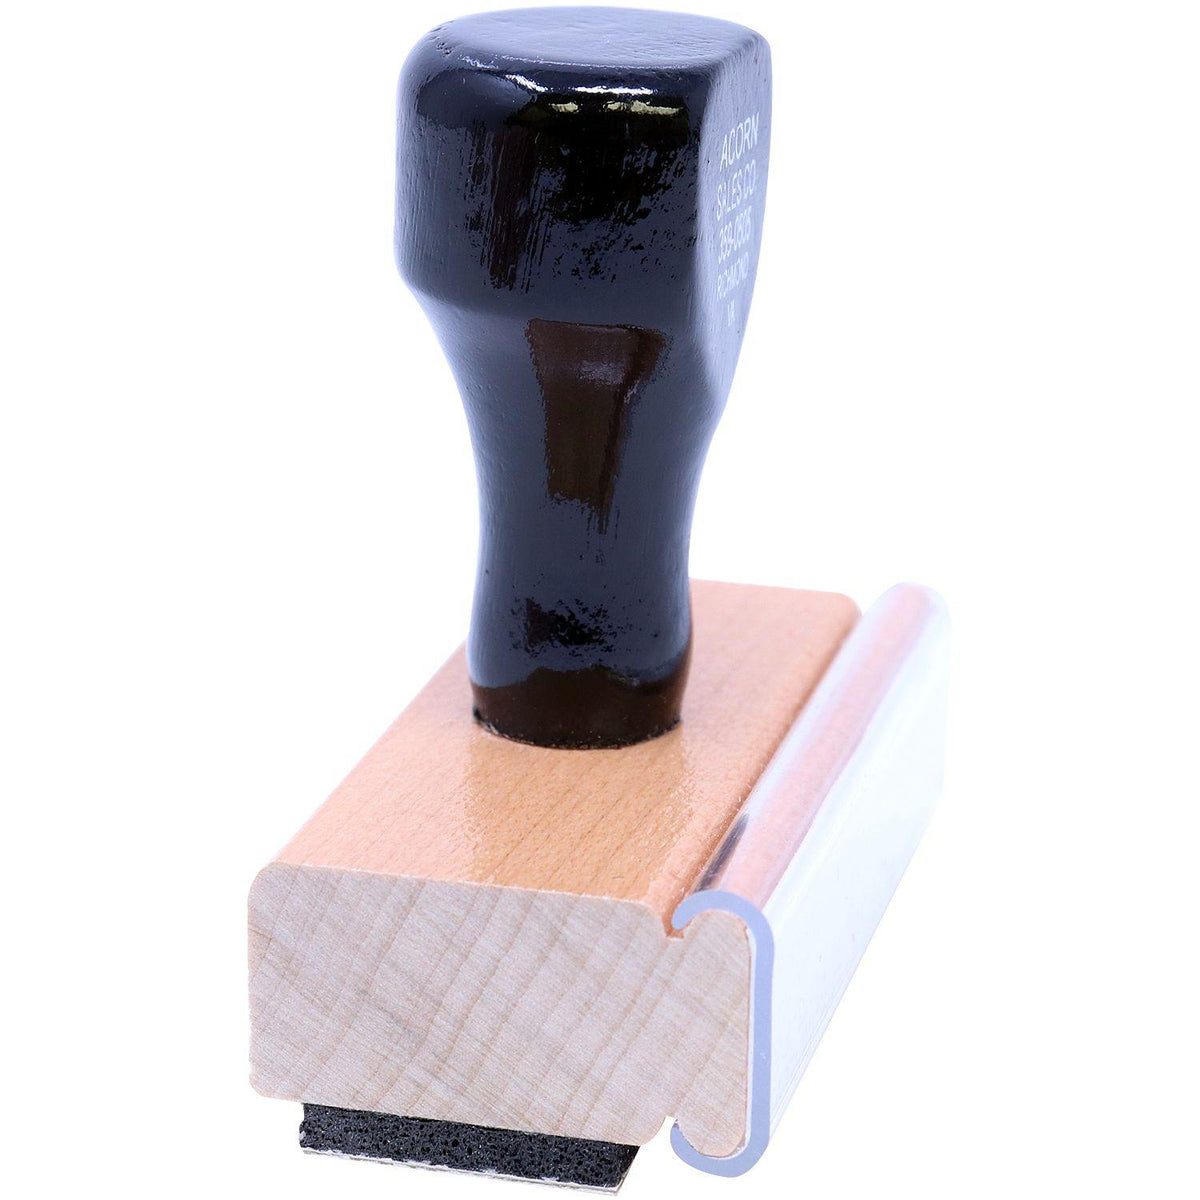 Side View of Large Despachado Rubber Stamp at an Angle